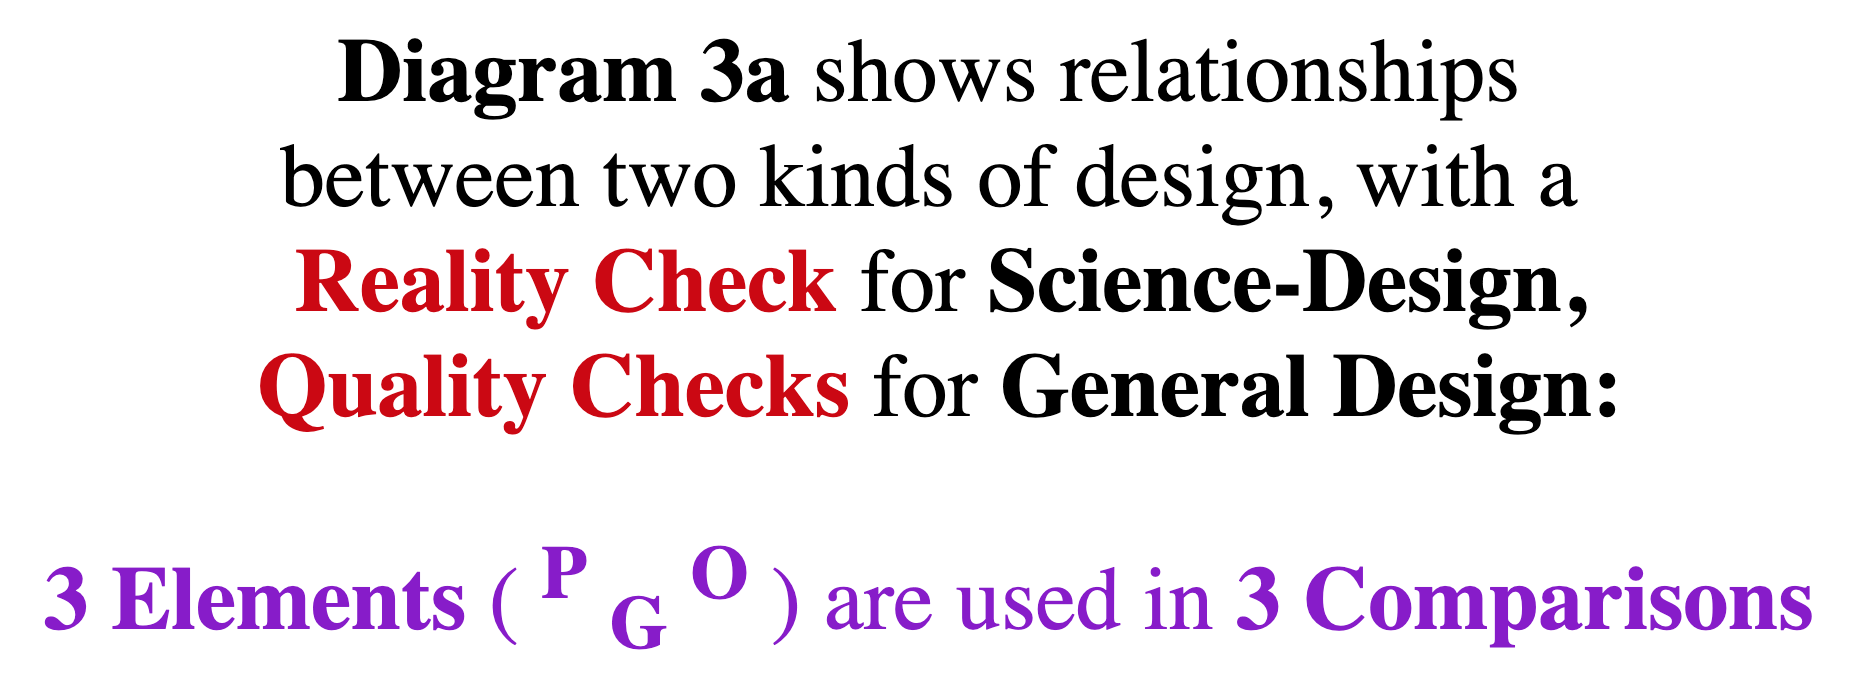 3 Elements used in 3 Comparisons - for 1 Reality Check & 2 Quality Checks 